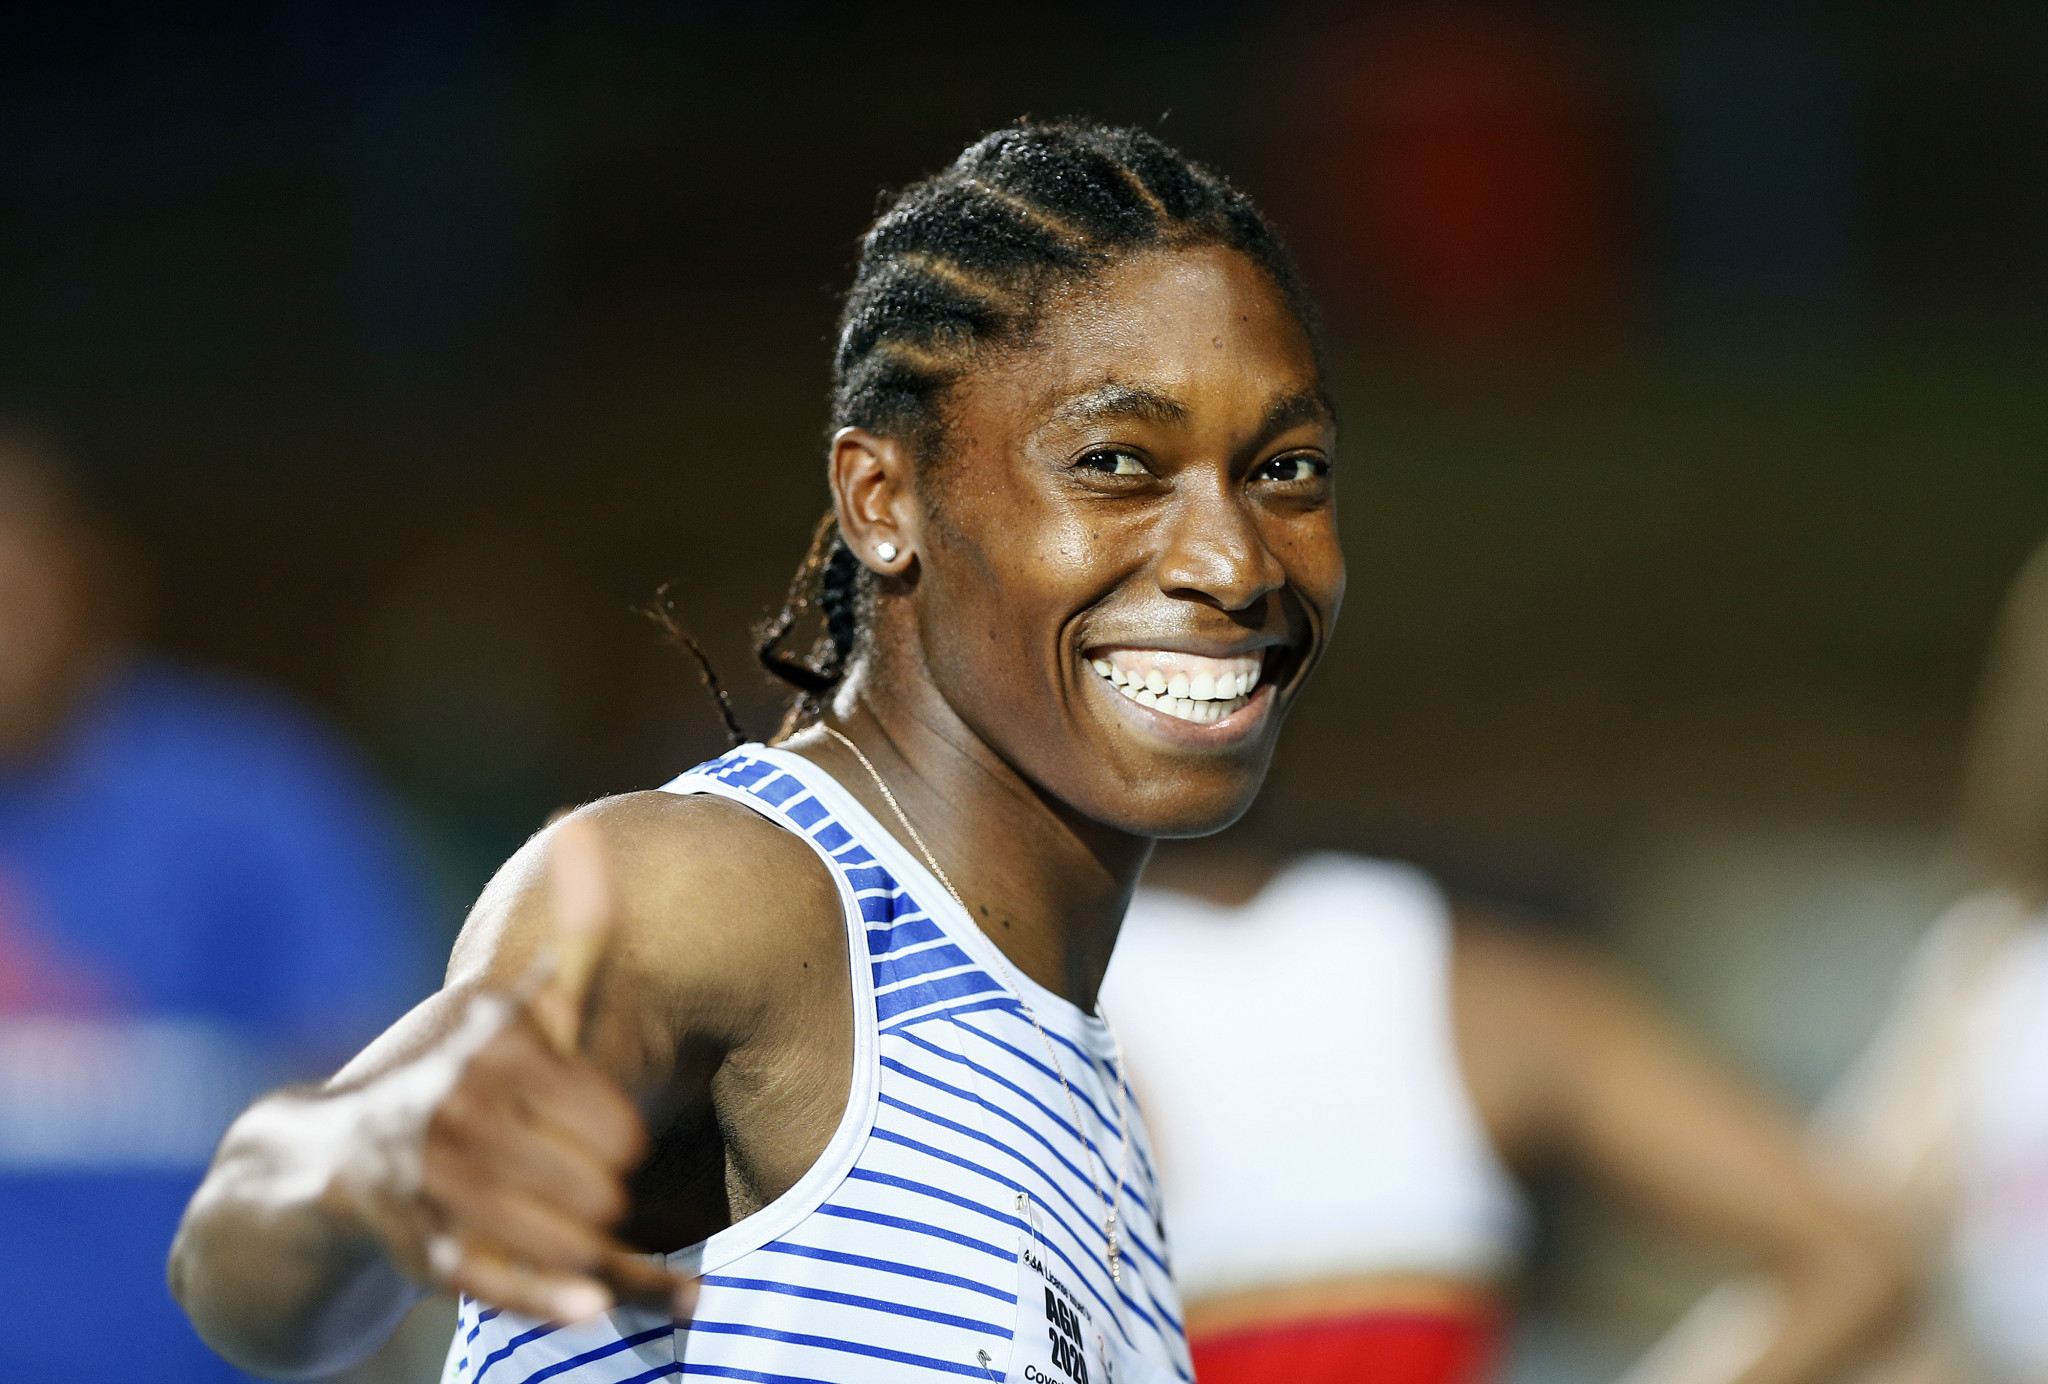 South Africa's Caster Semenya is one of the most high-profile athletes affected by sex testing regulations ©Getty Images